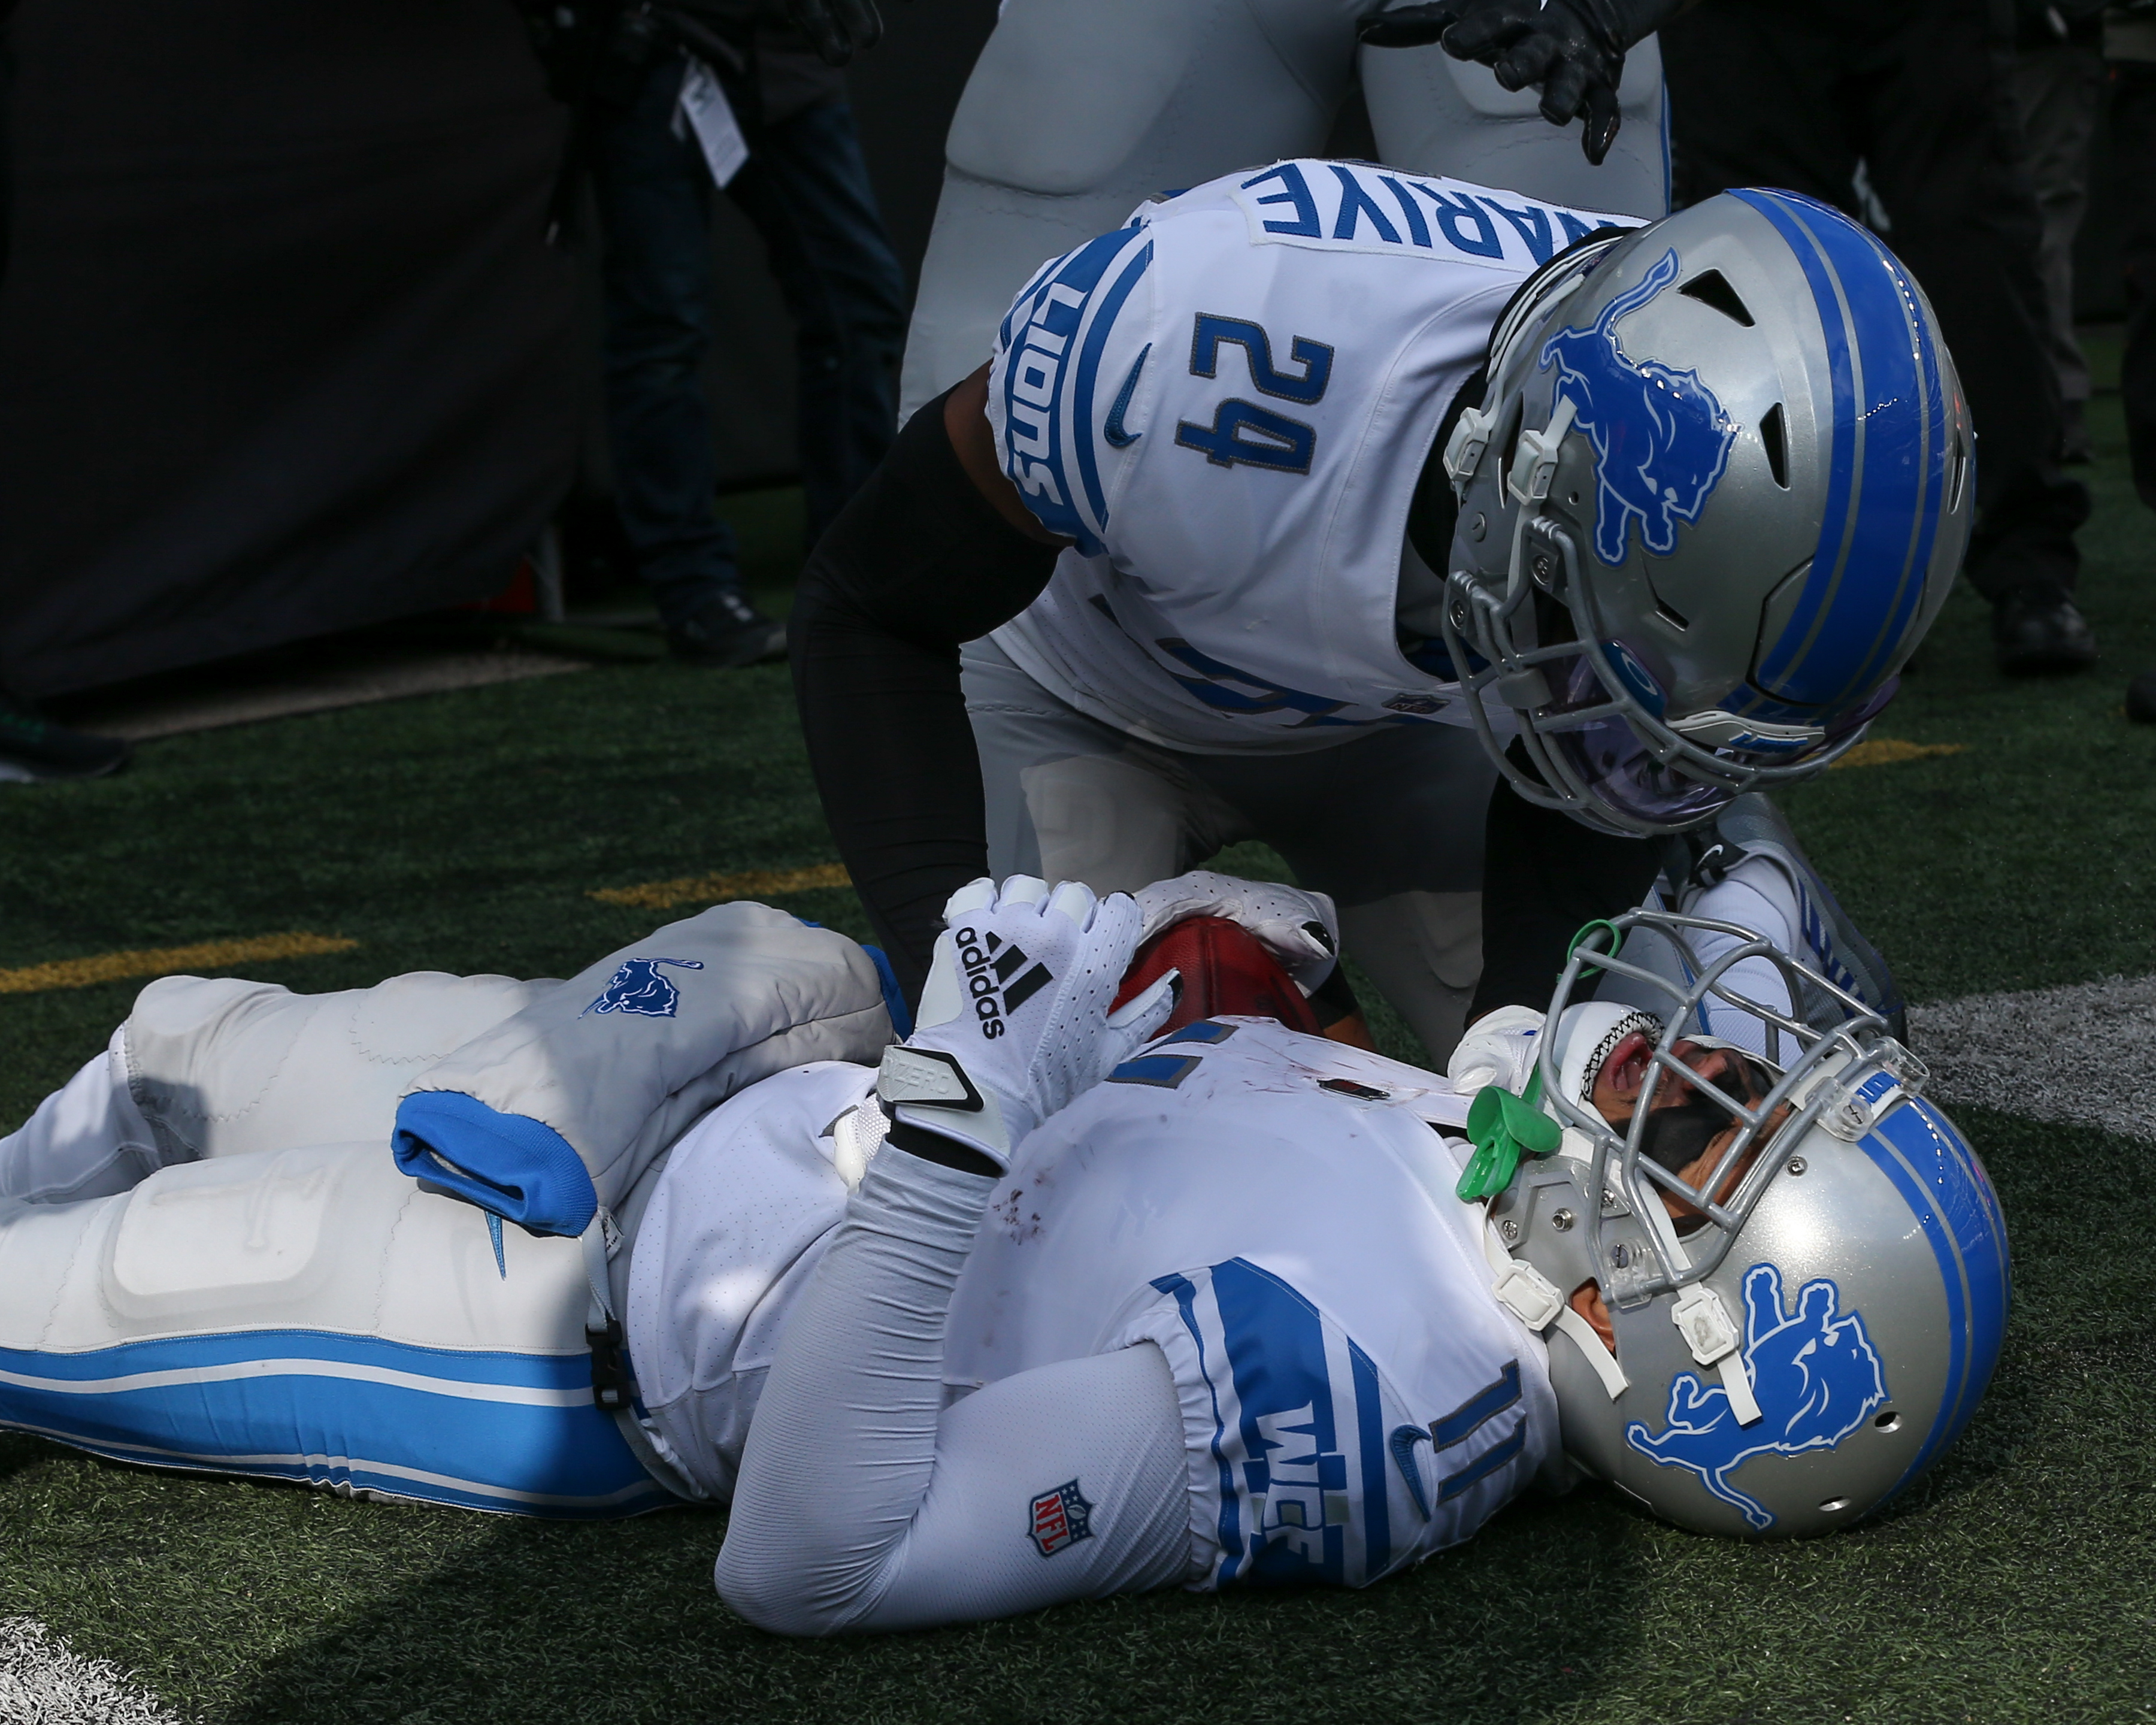 Summary and highlights of the Detroit Lions 20-17 New York Jets in NFL